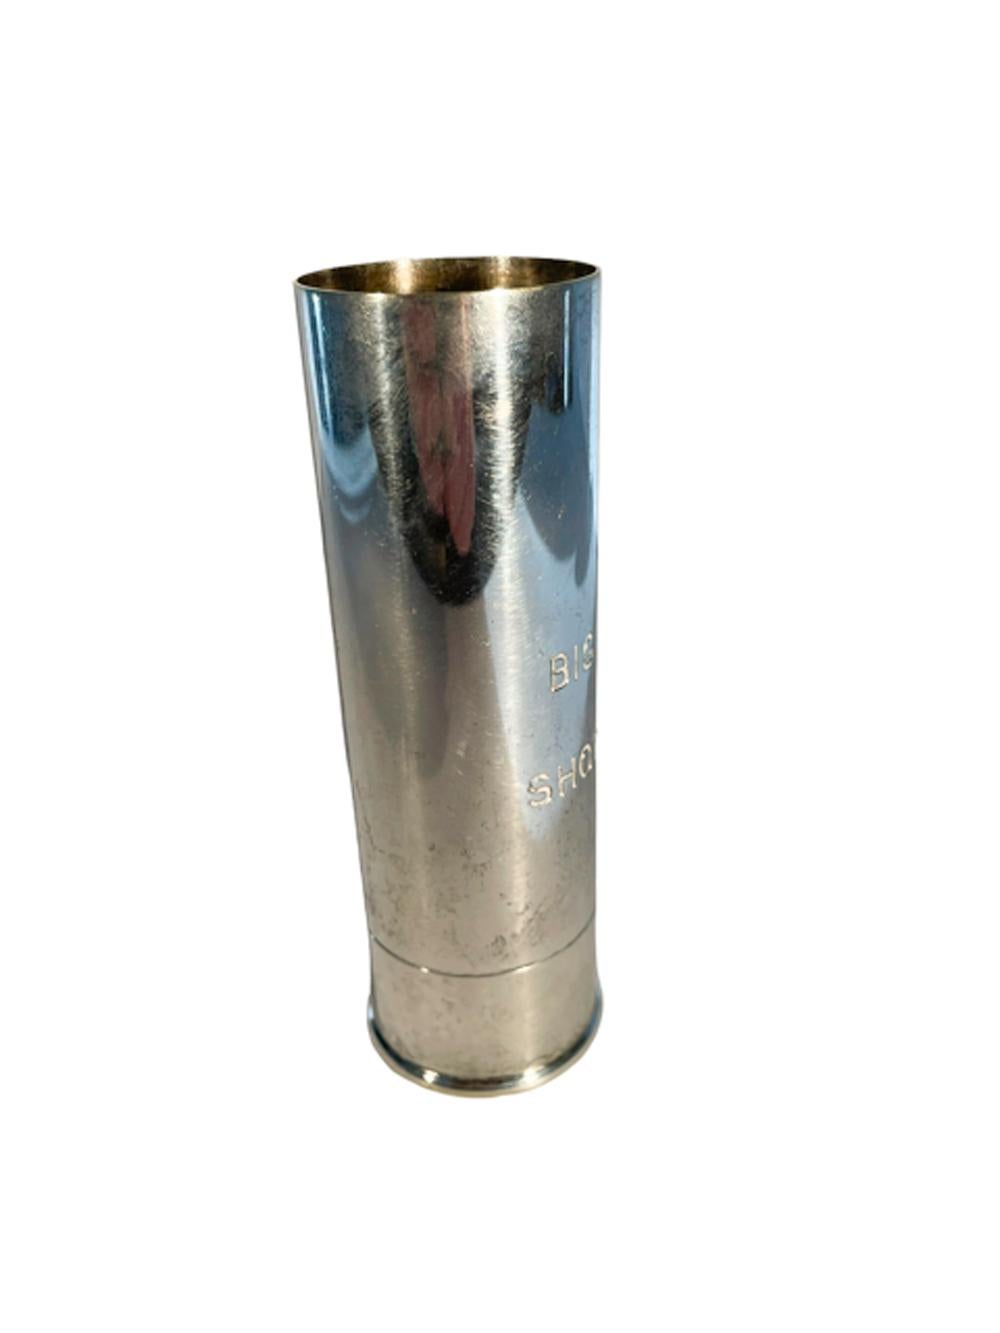 Silver plate Art Deco spirit measure or jigger of unusual 5 once Size made in the form of a shotgun shell with the words 